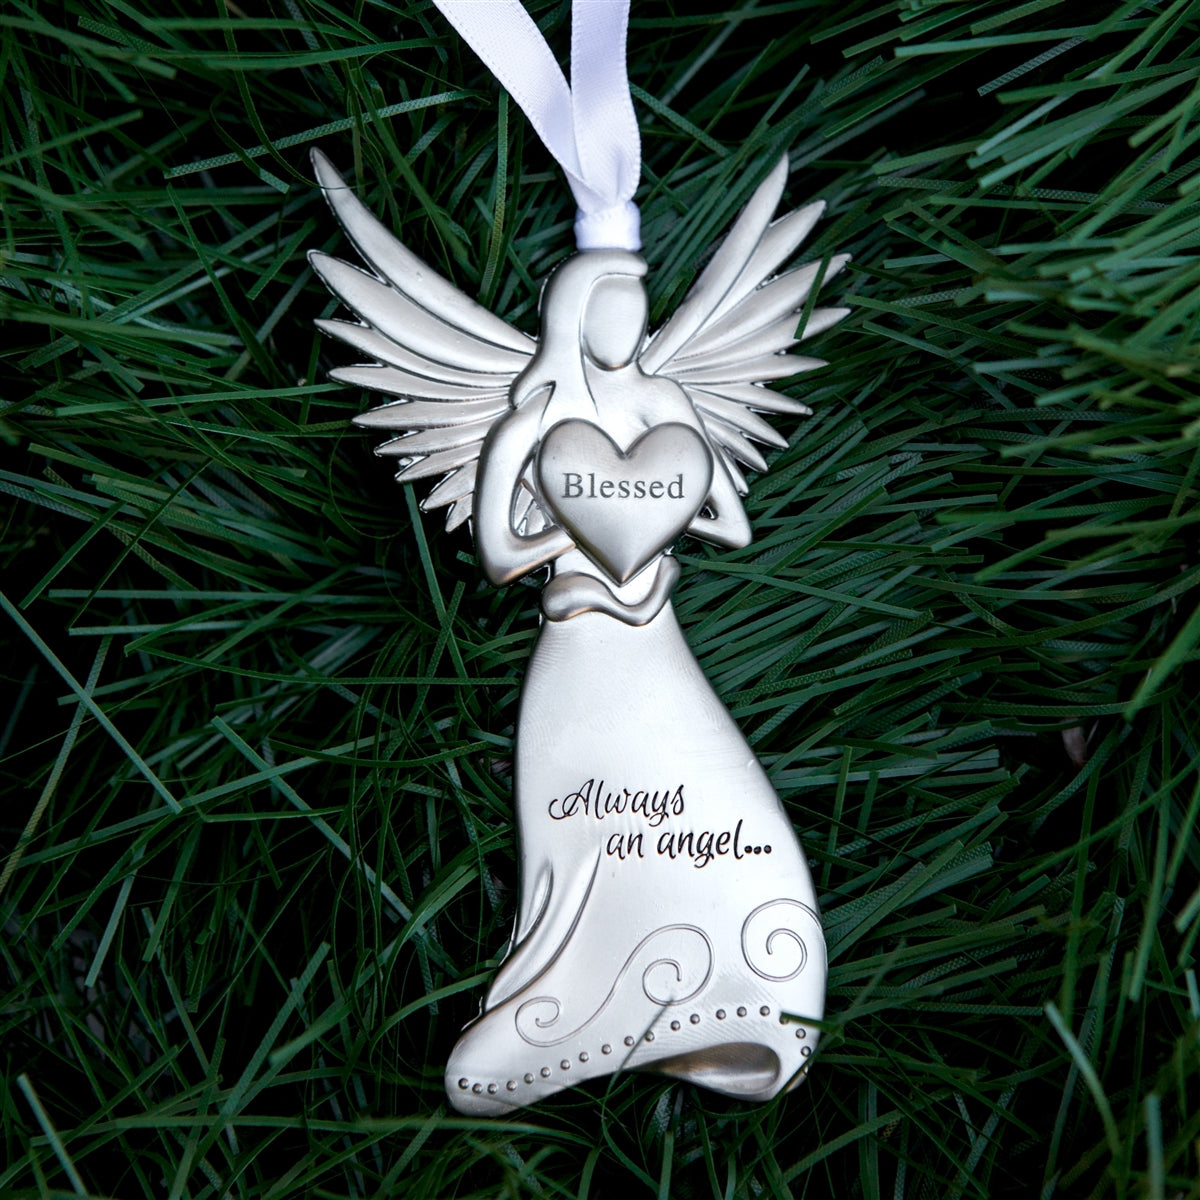 Silver toned metal angel holding a heart with the word &quot;Blessed&quot; in the center and &quot;Always and angel ...&quot; engraved on the angel&#39;s skirt